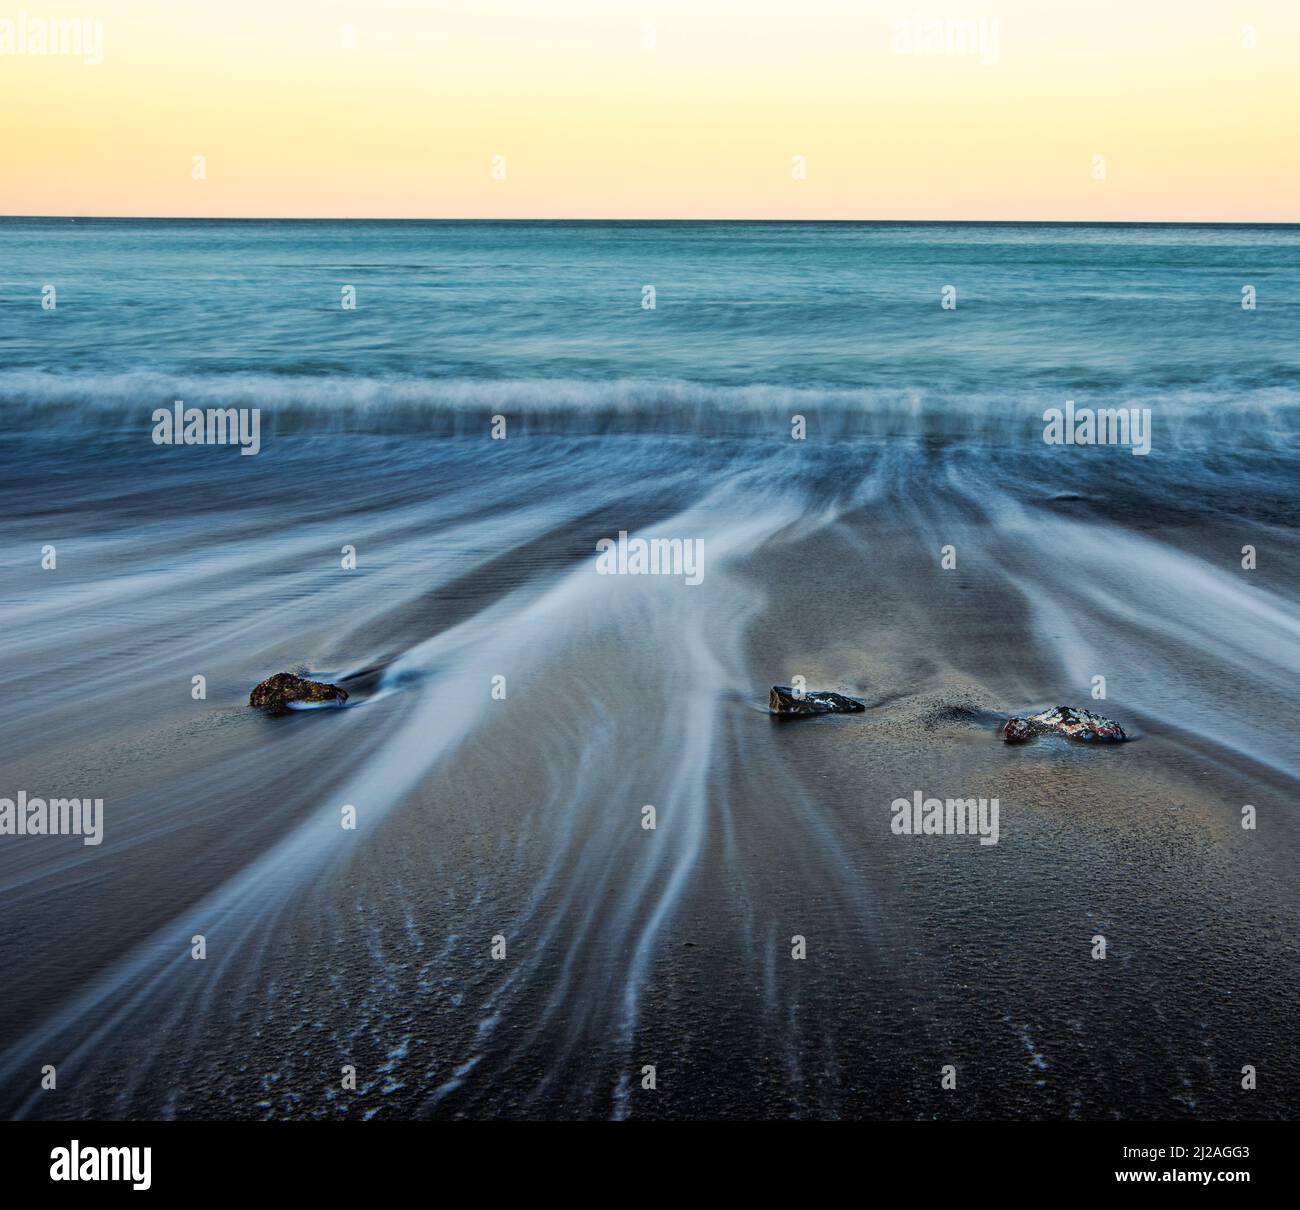 Isshiki Beach at low tide creates great opportunities for long-exposure photography as the waves slowly recede back into the ocean leaving behind trai Stock Photo